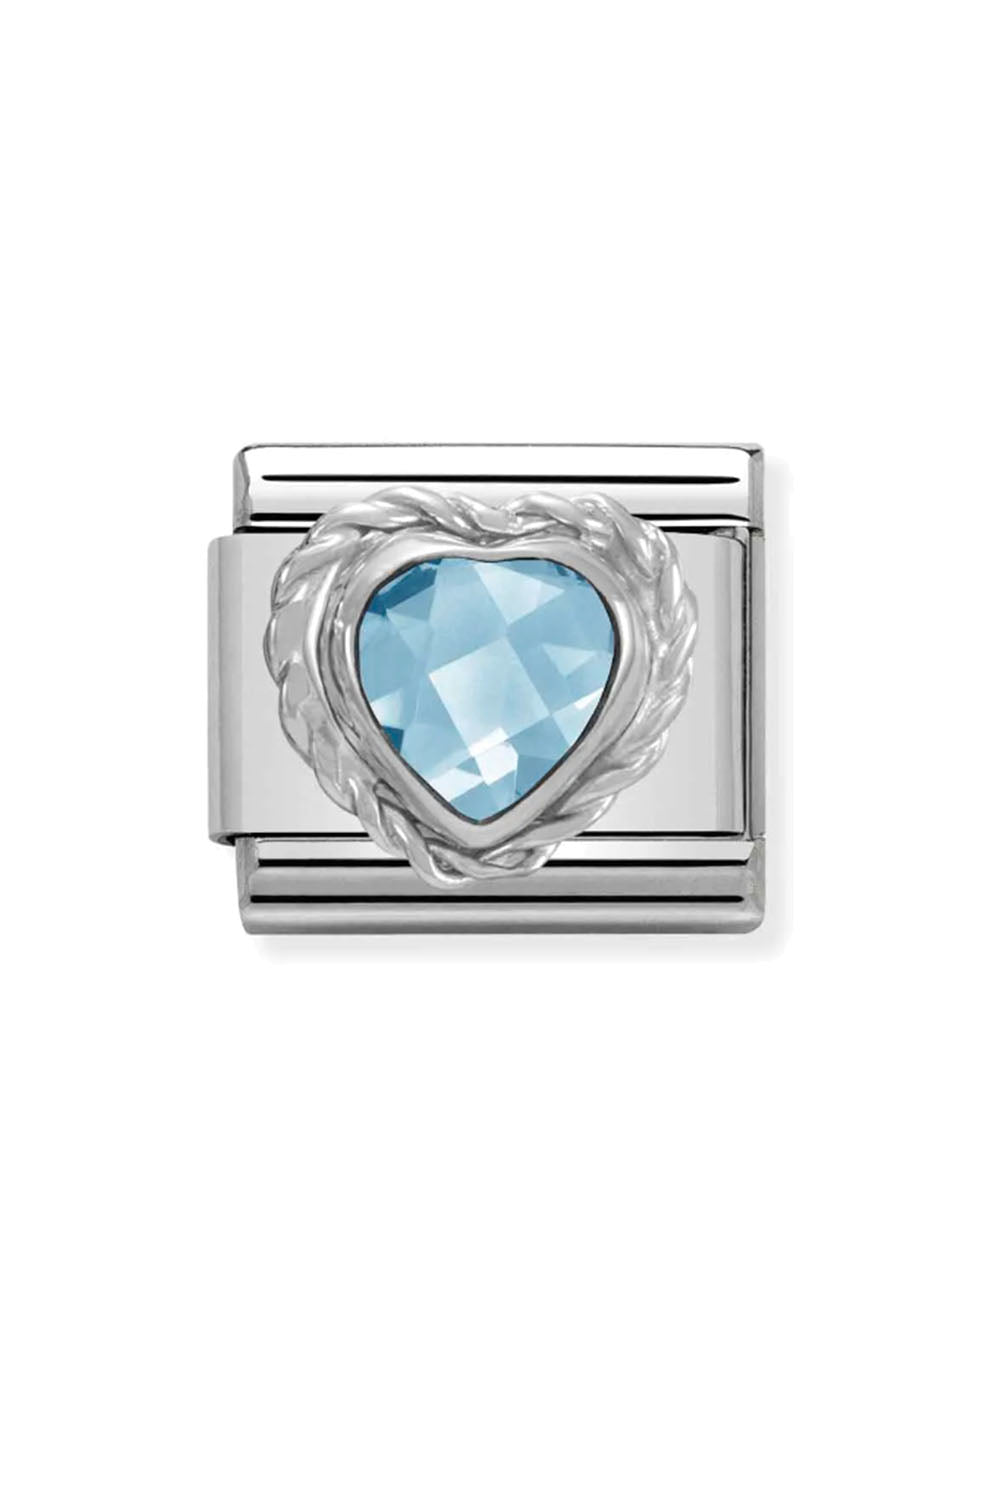 Heart faceted with 925 Sterling silver twisted setting and CZ light blue